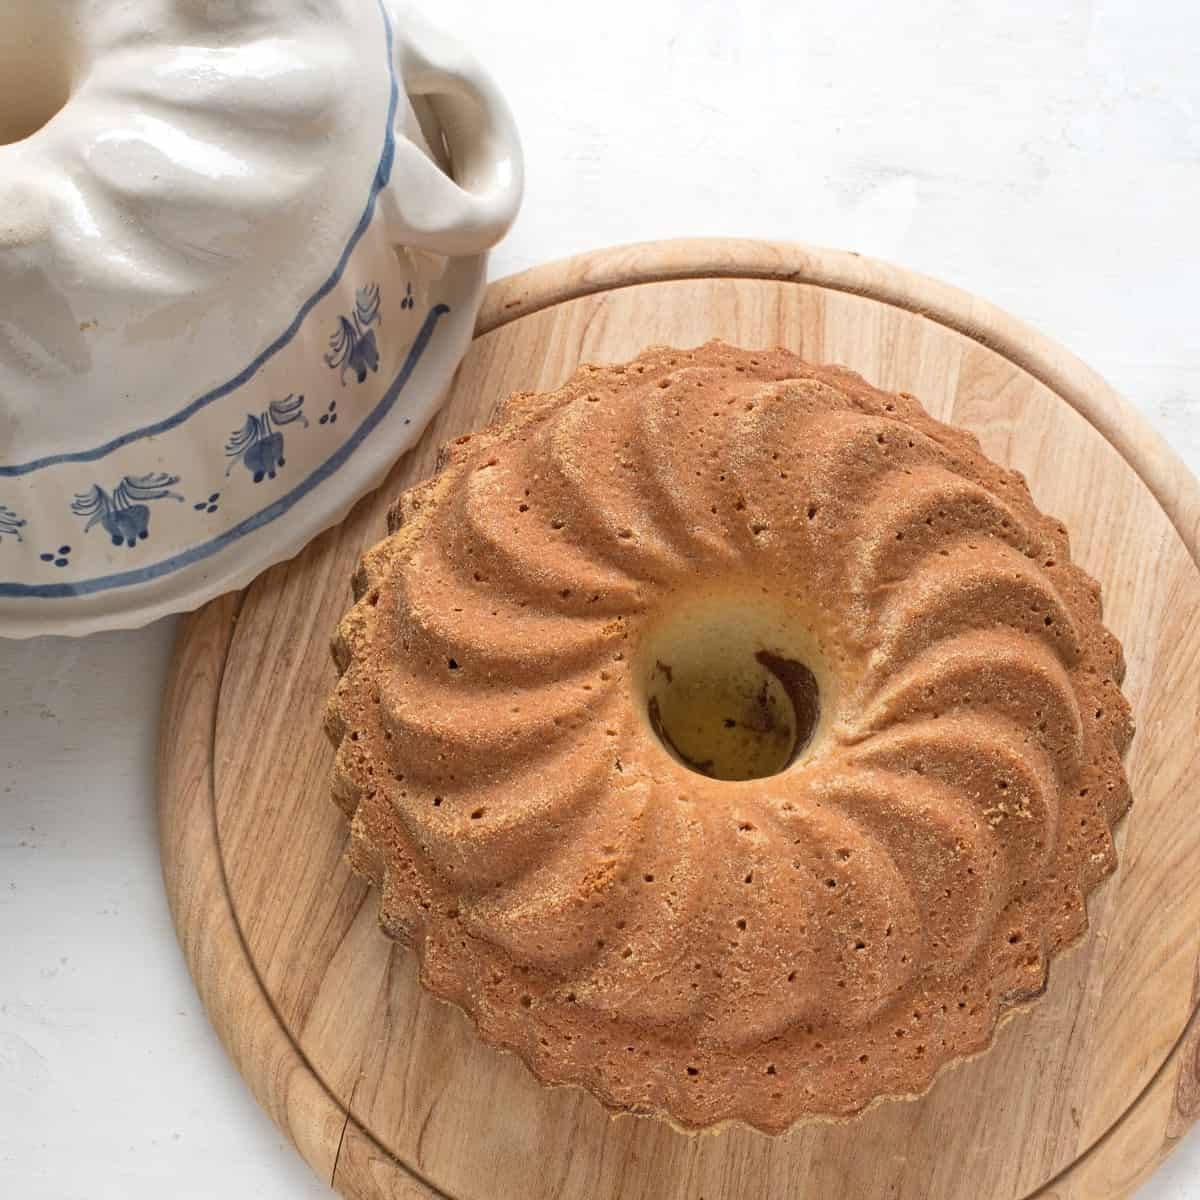 Baked bundt cake taken out of the pan.